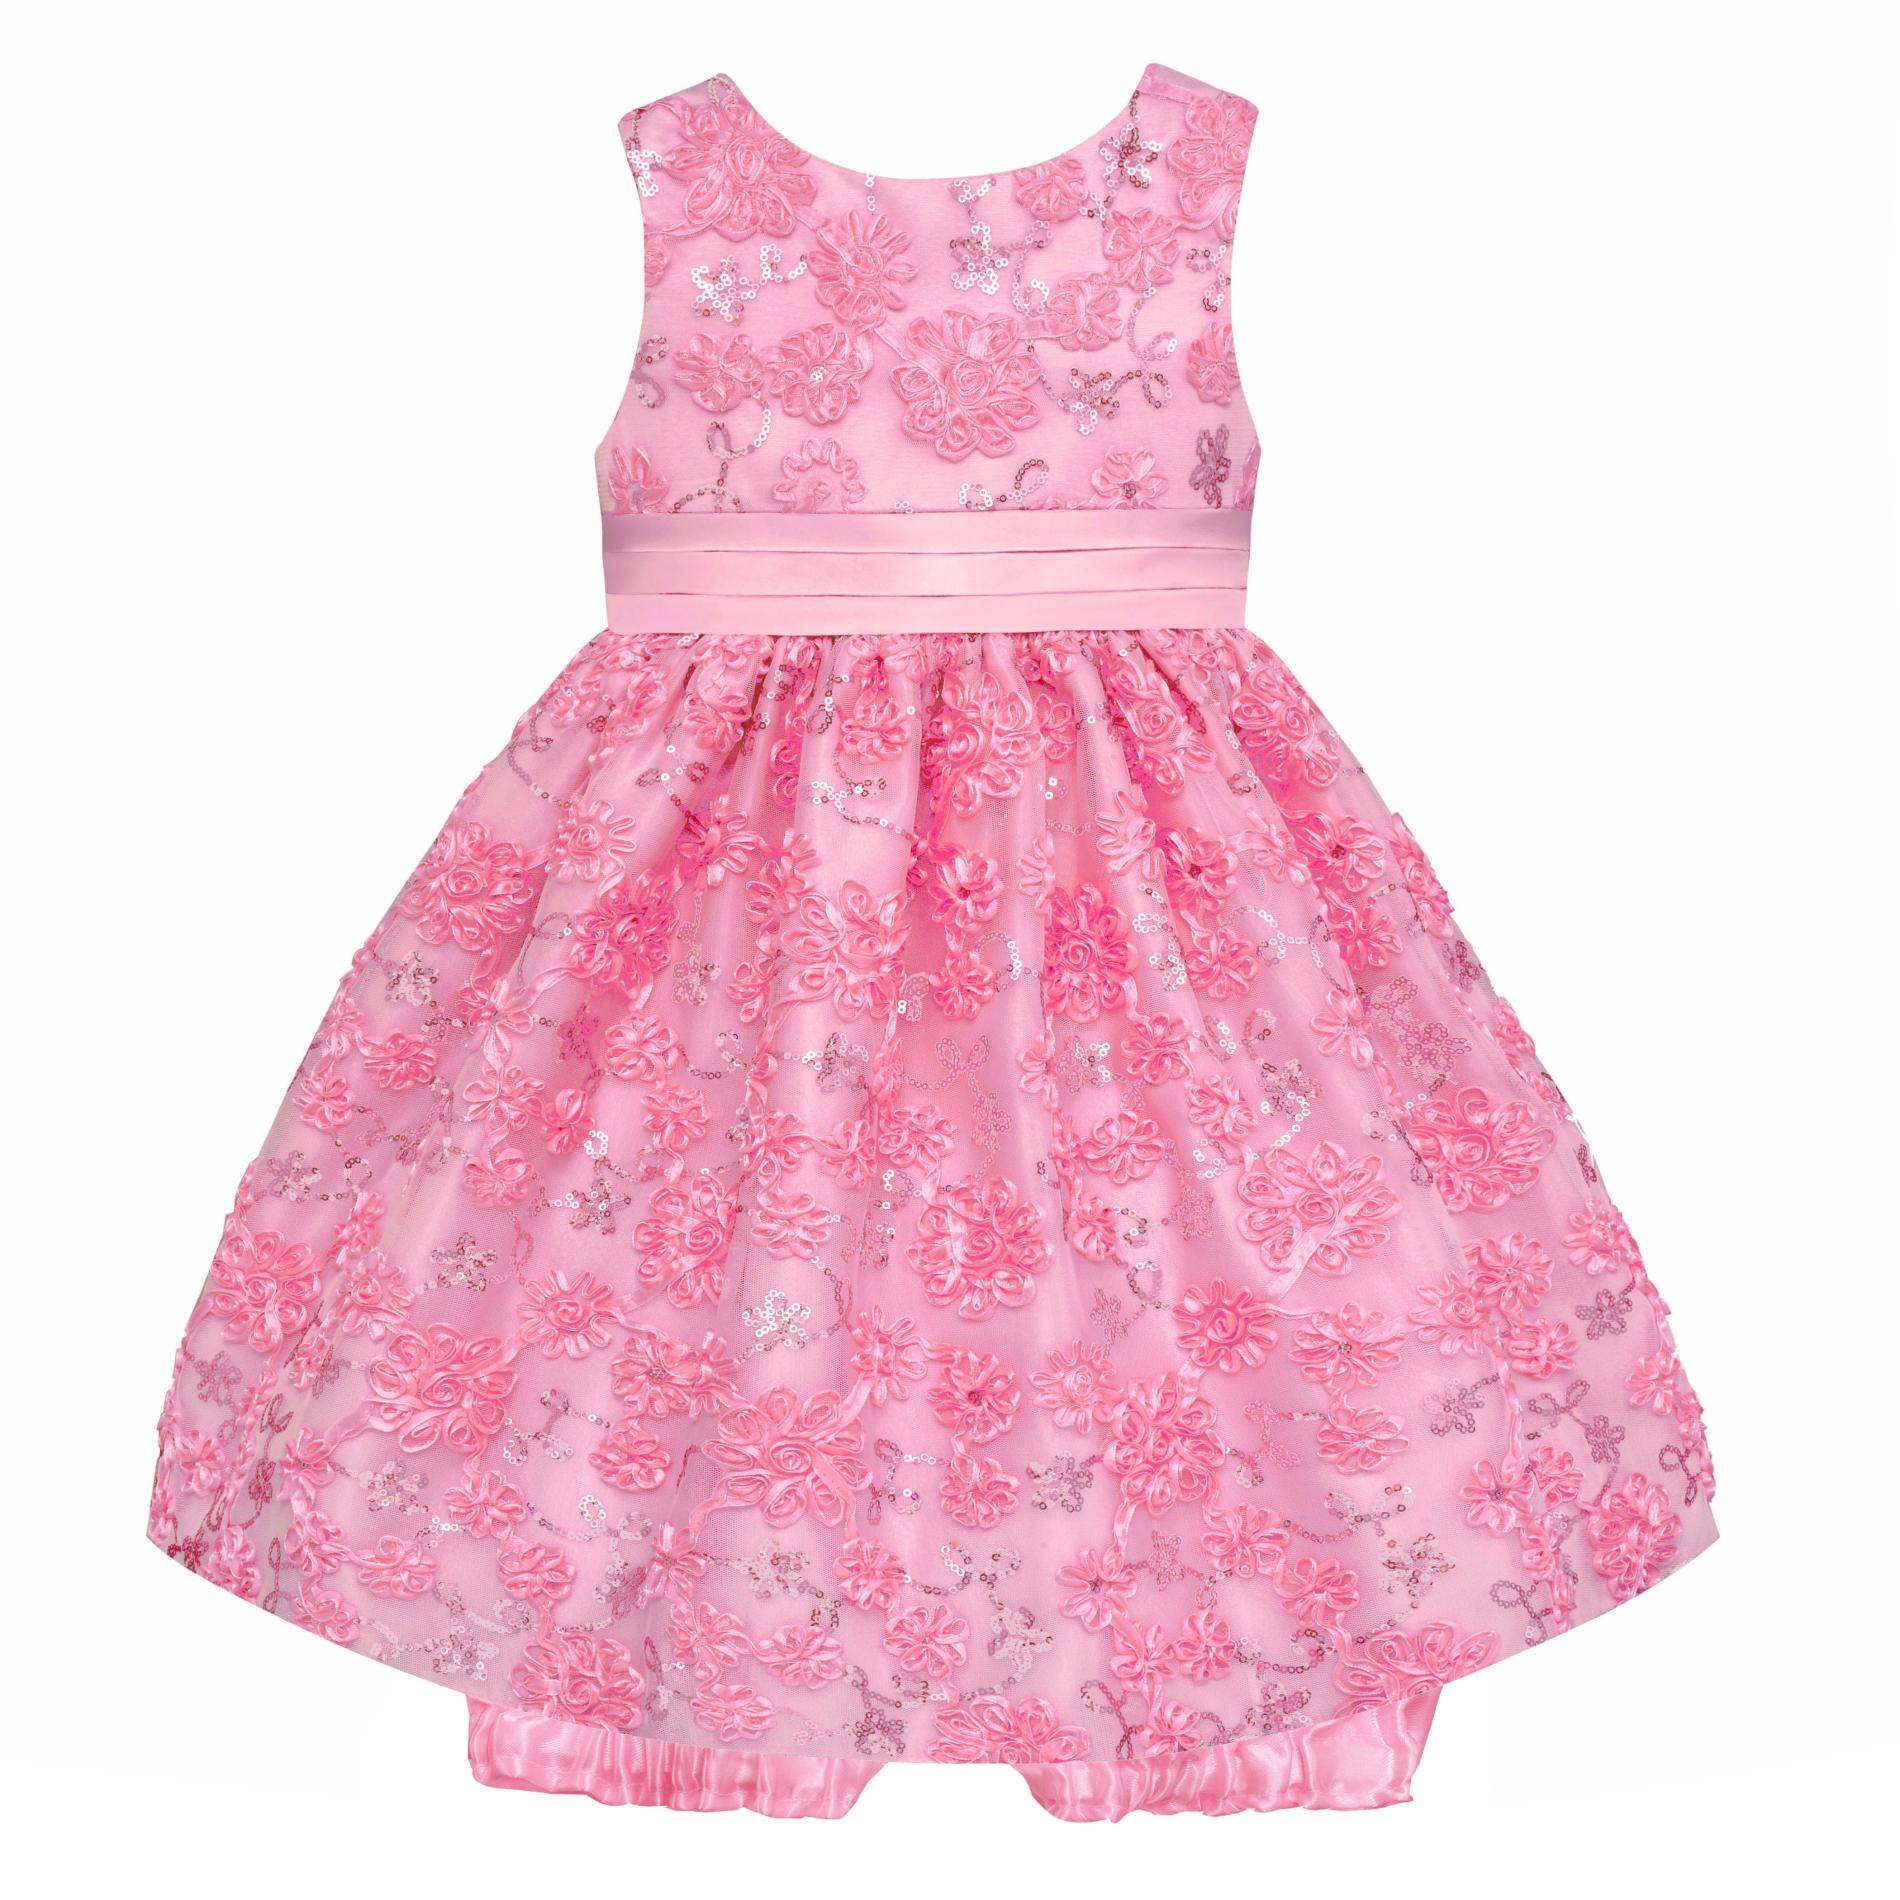 American Princess Infant & Toddler Girl's Sequin Party Dress - Floral